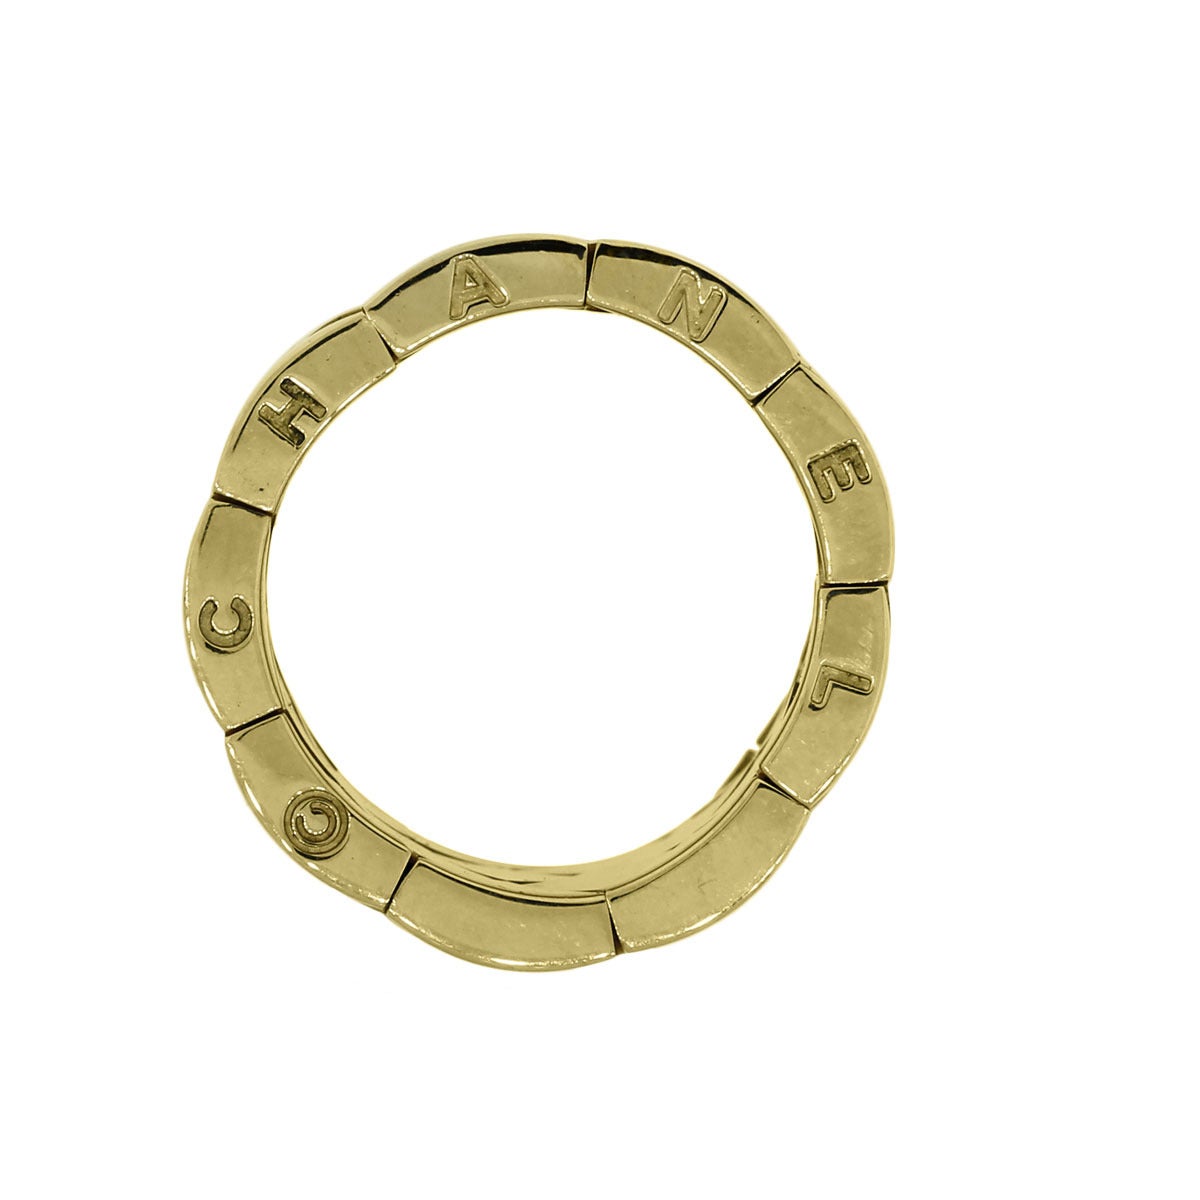 Style: Chanel Matelasse 18k Yellow Gold Wide Ring
Material: 18k Yellow Gold
Ring Measurements: 0.90